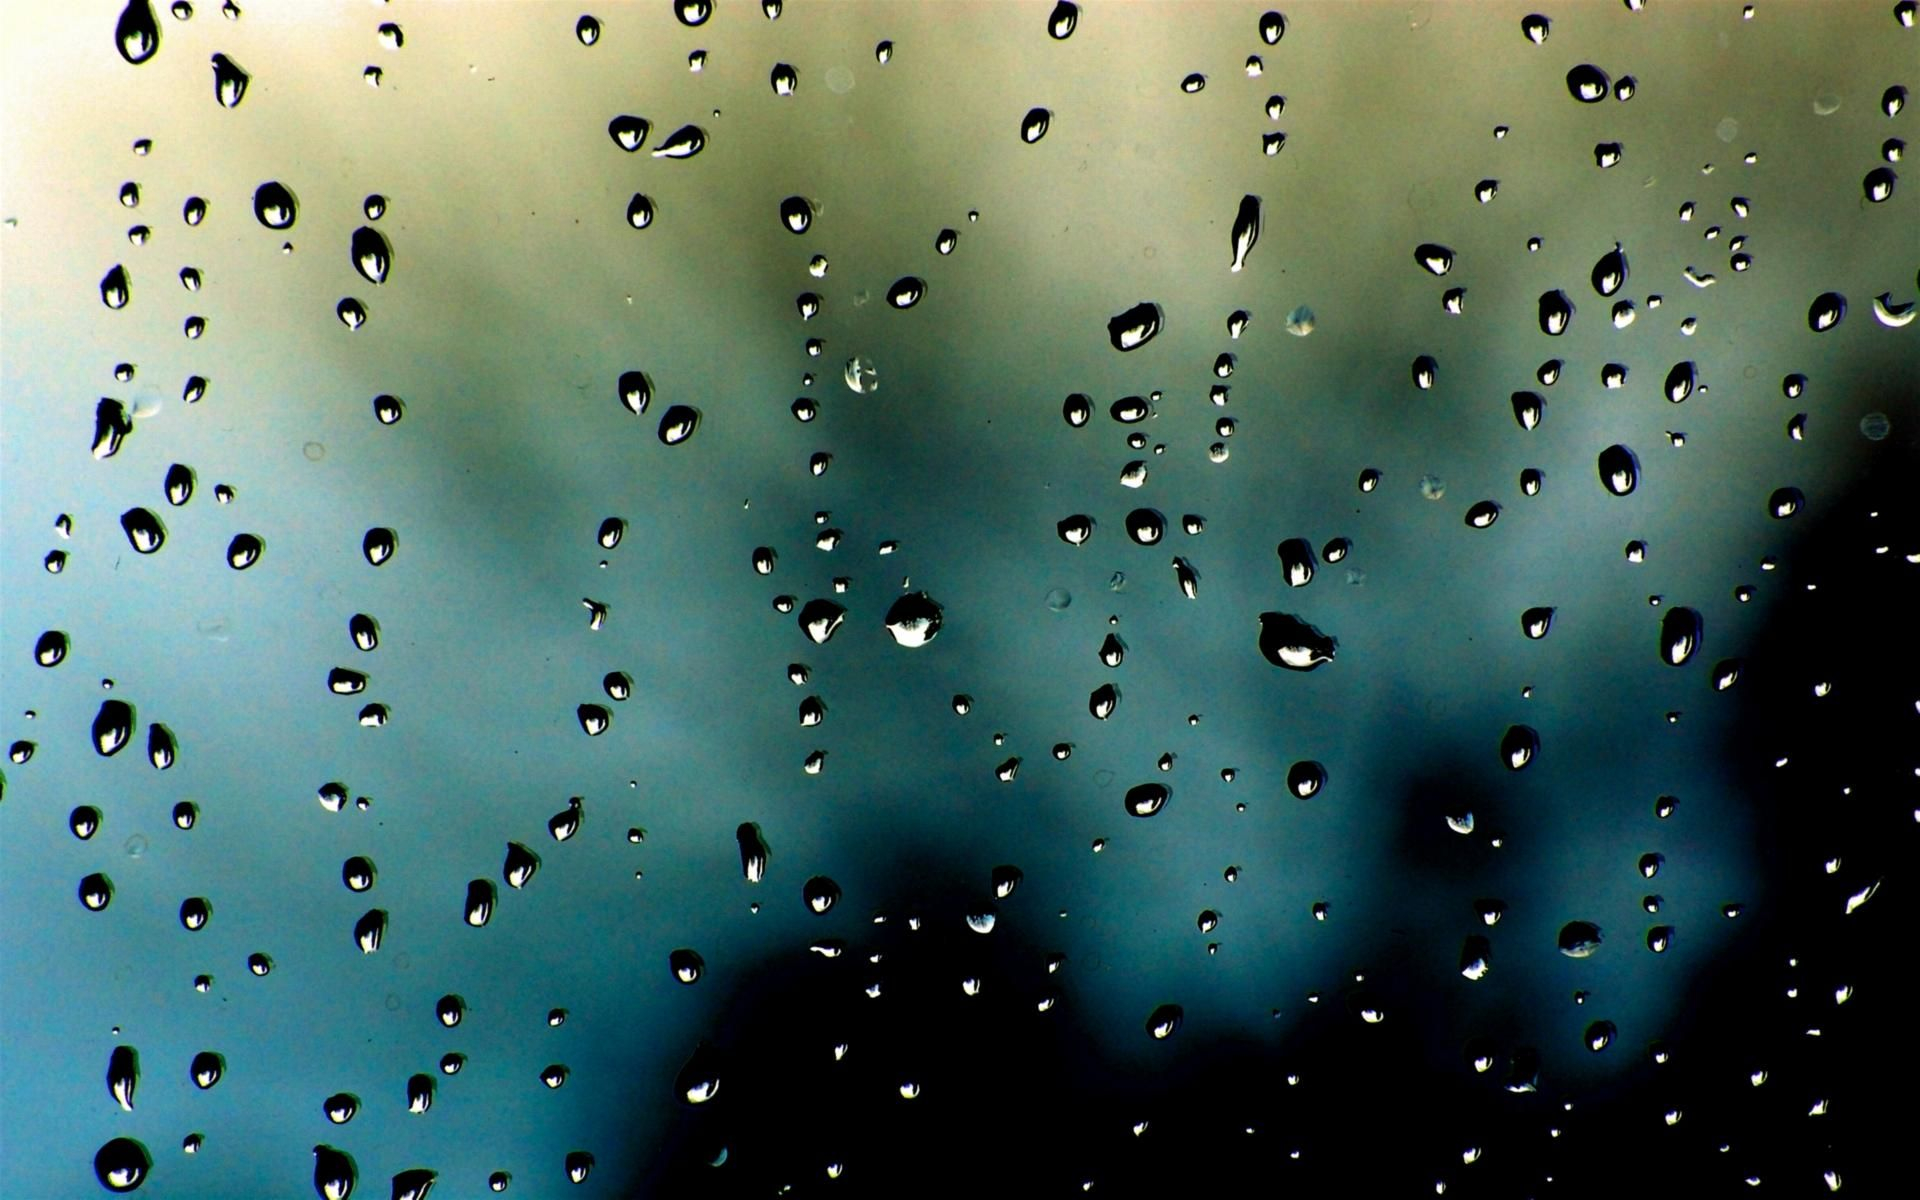 1920x1200 Raindrops on the window | Rainy day wallpaper, Android wallpaper hd backgrounds, Rain wallpapers